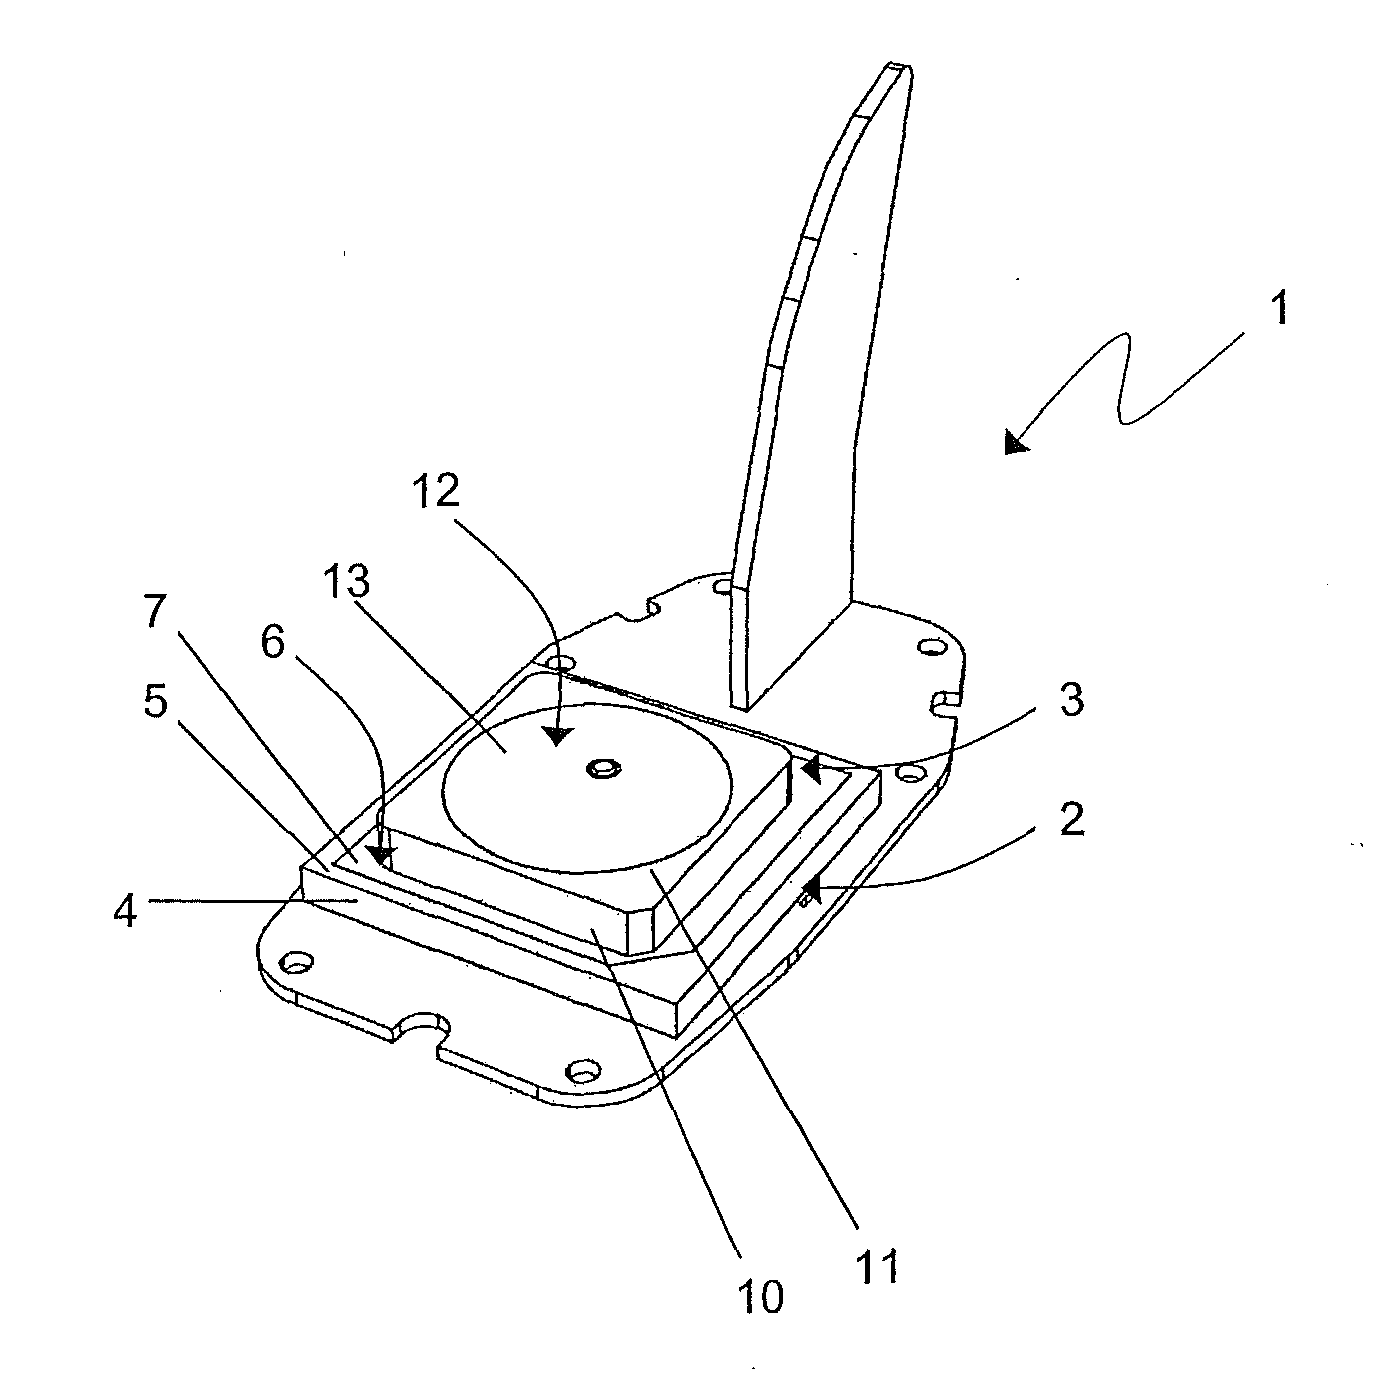 Multifunctional Antenna Module For Use with a Multiplicity of Radiofrequency Signals